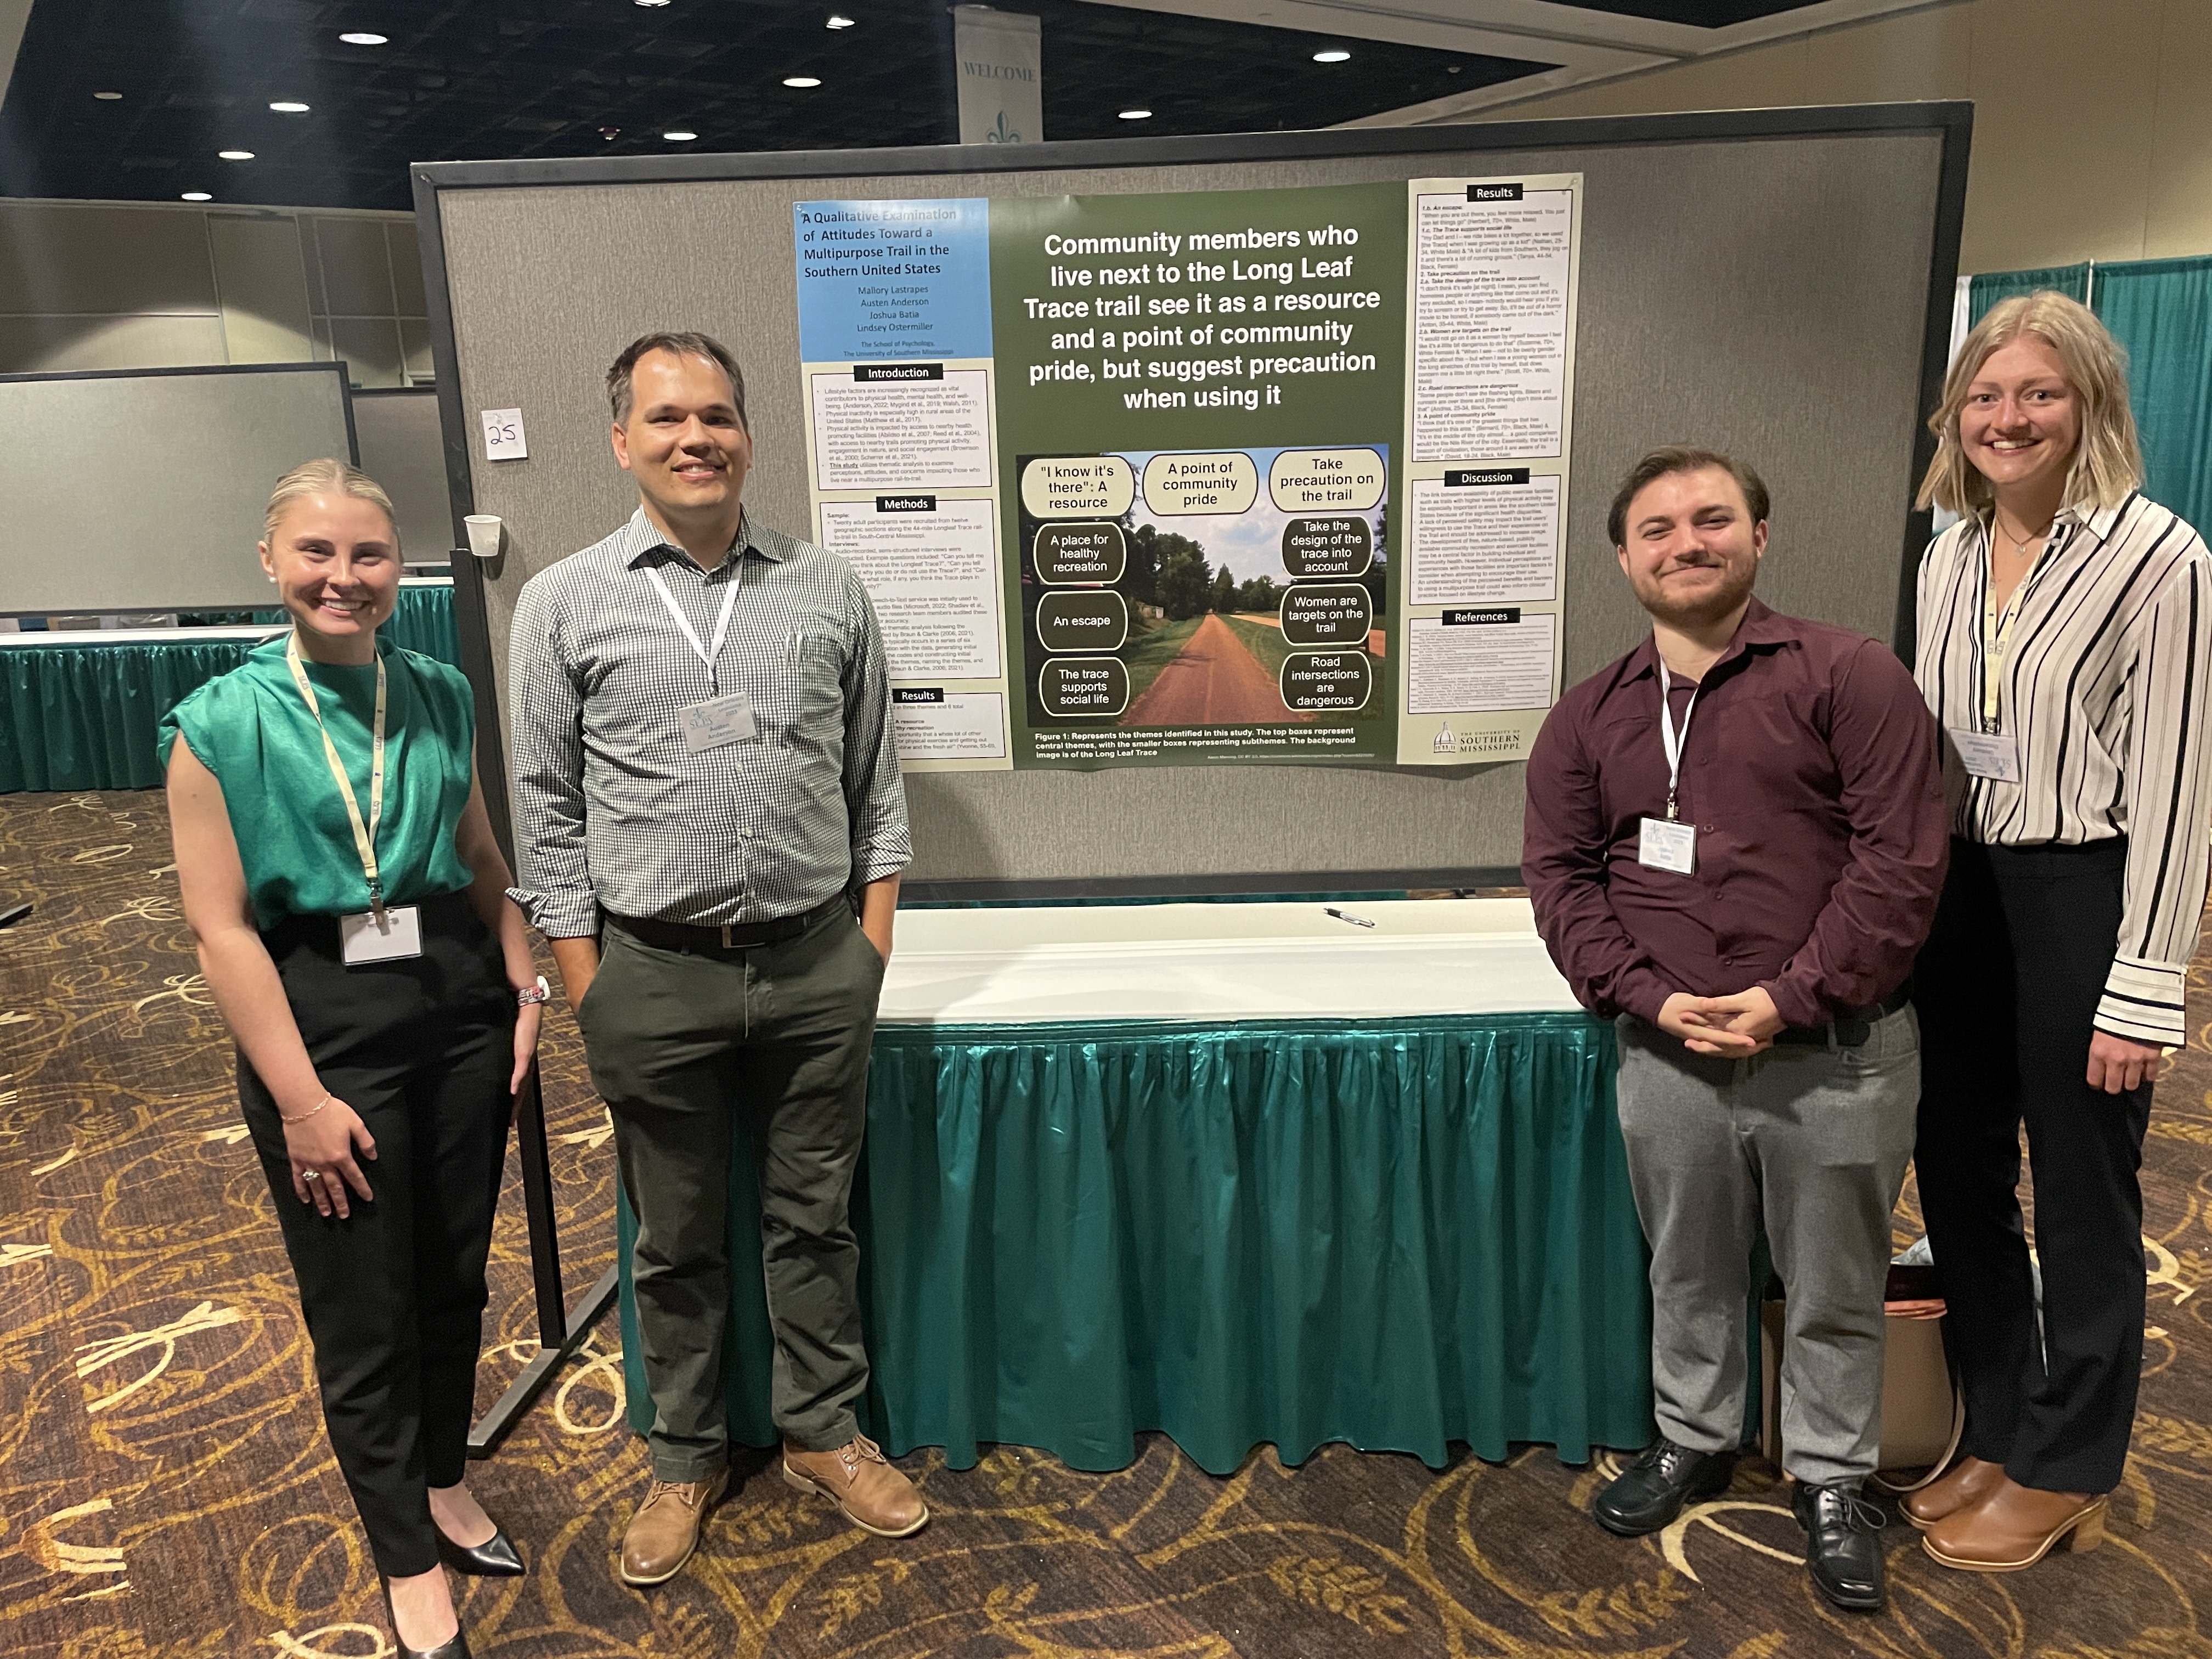 Long leaf trace poster and presenters